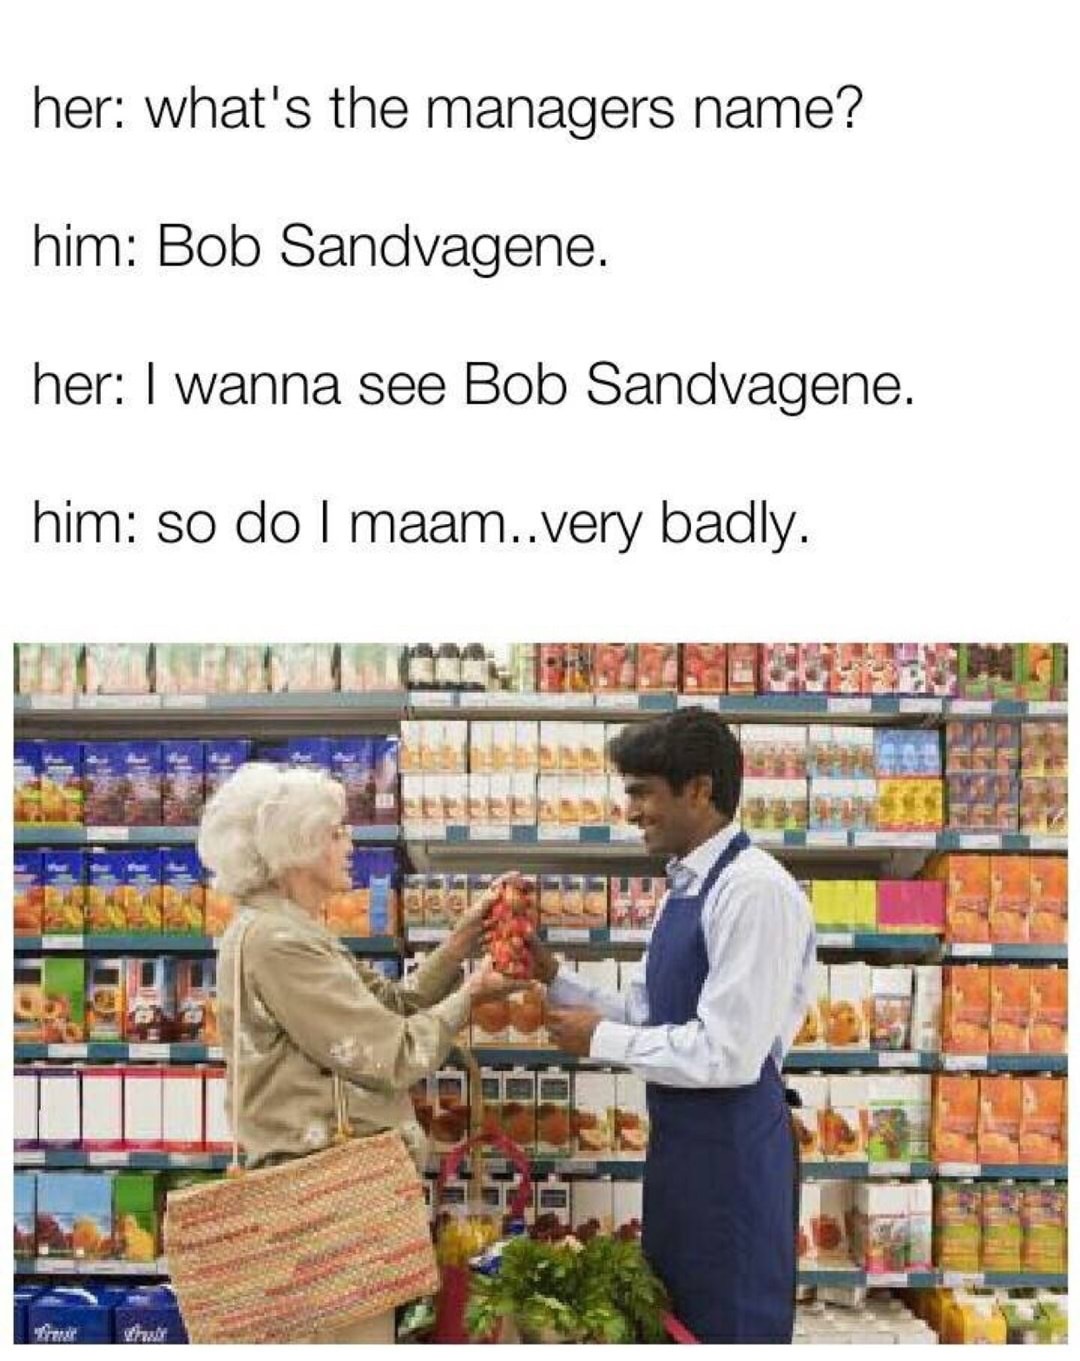 bob sandvagene - her what's the managers name? him Bob Sandvagene. her I wanna see Bob Sandvagene. him so do I maam..very badly.